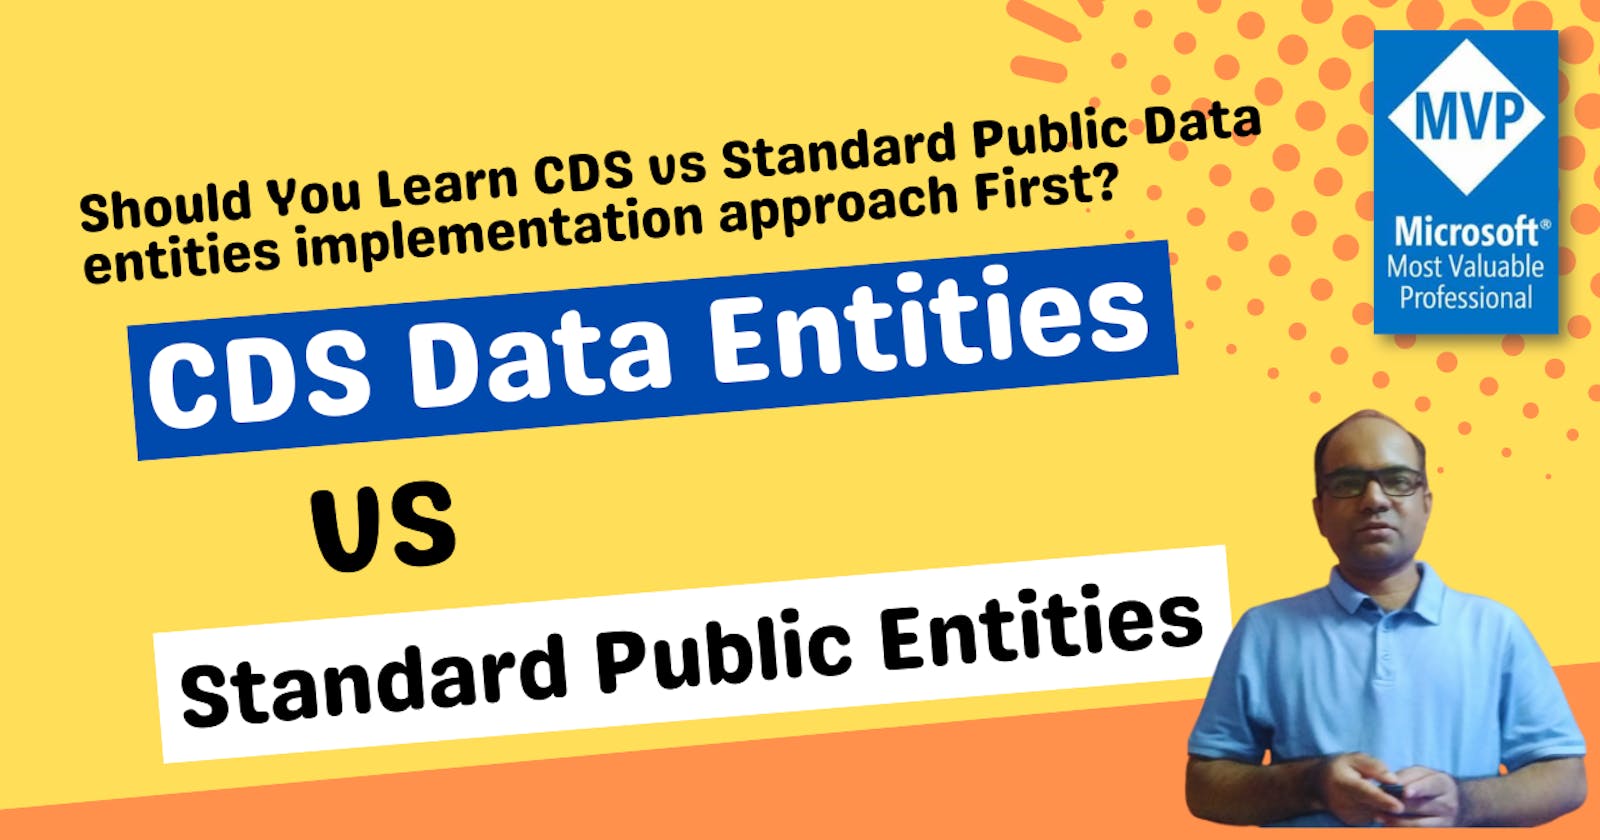 Should You Learn CDS vs. Standard public data entities implementation approach First?